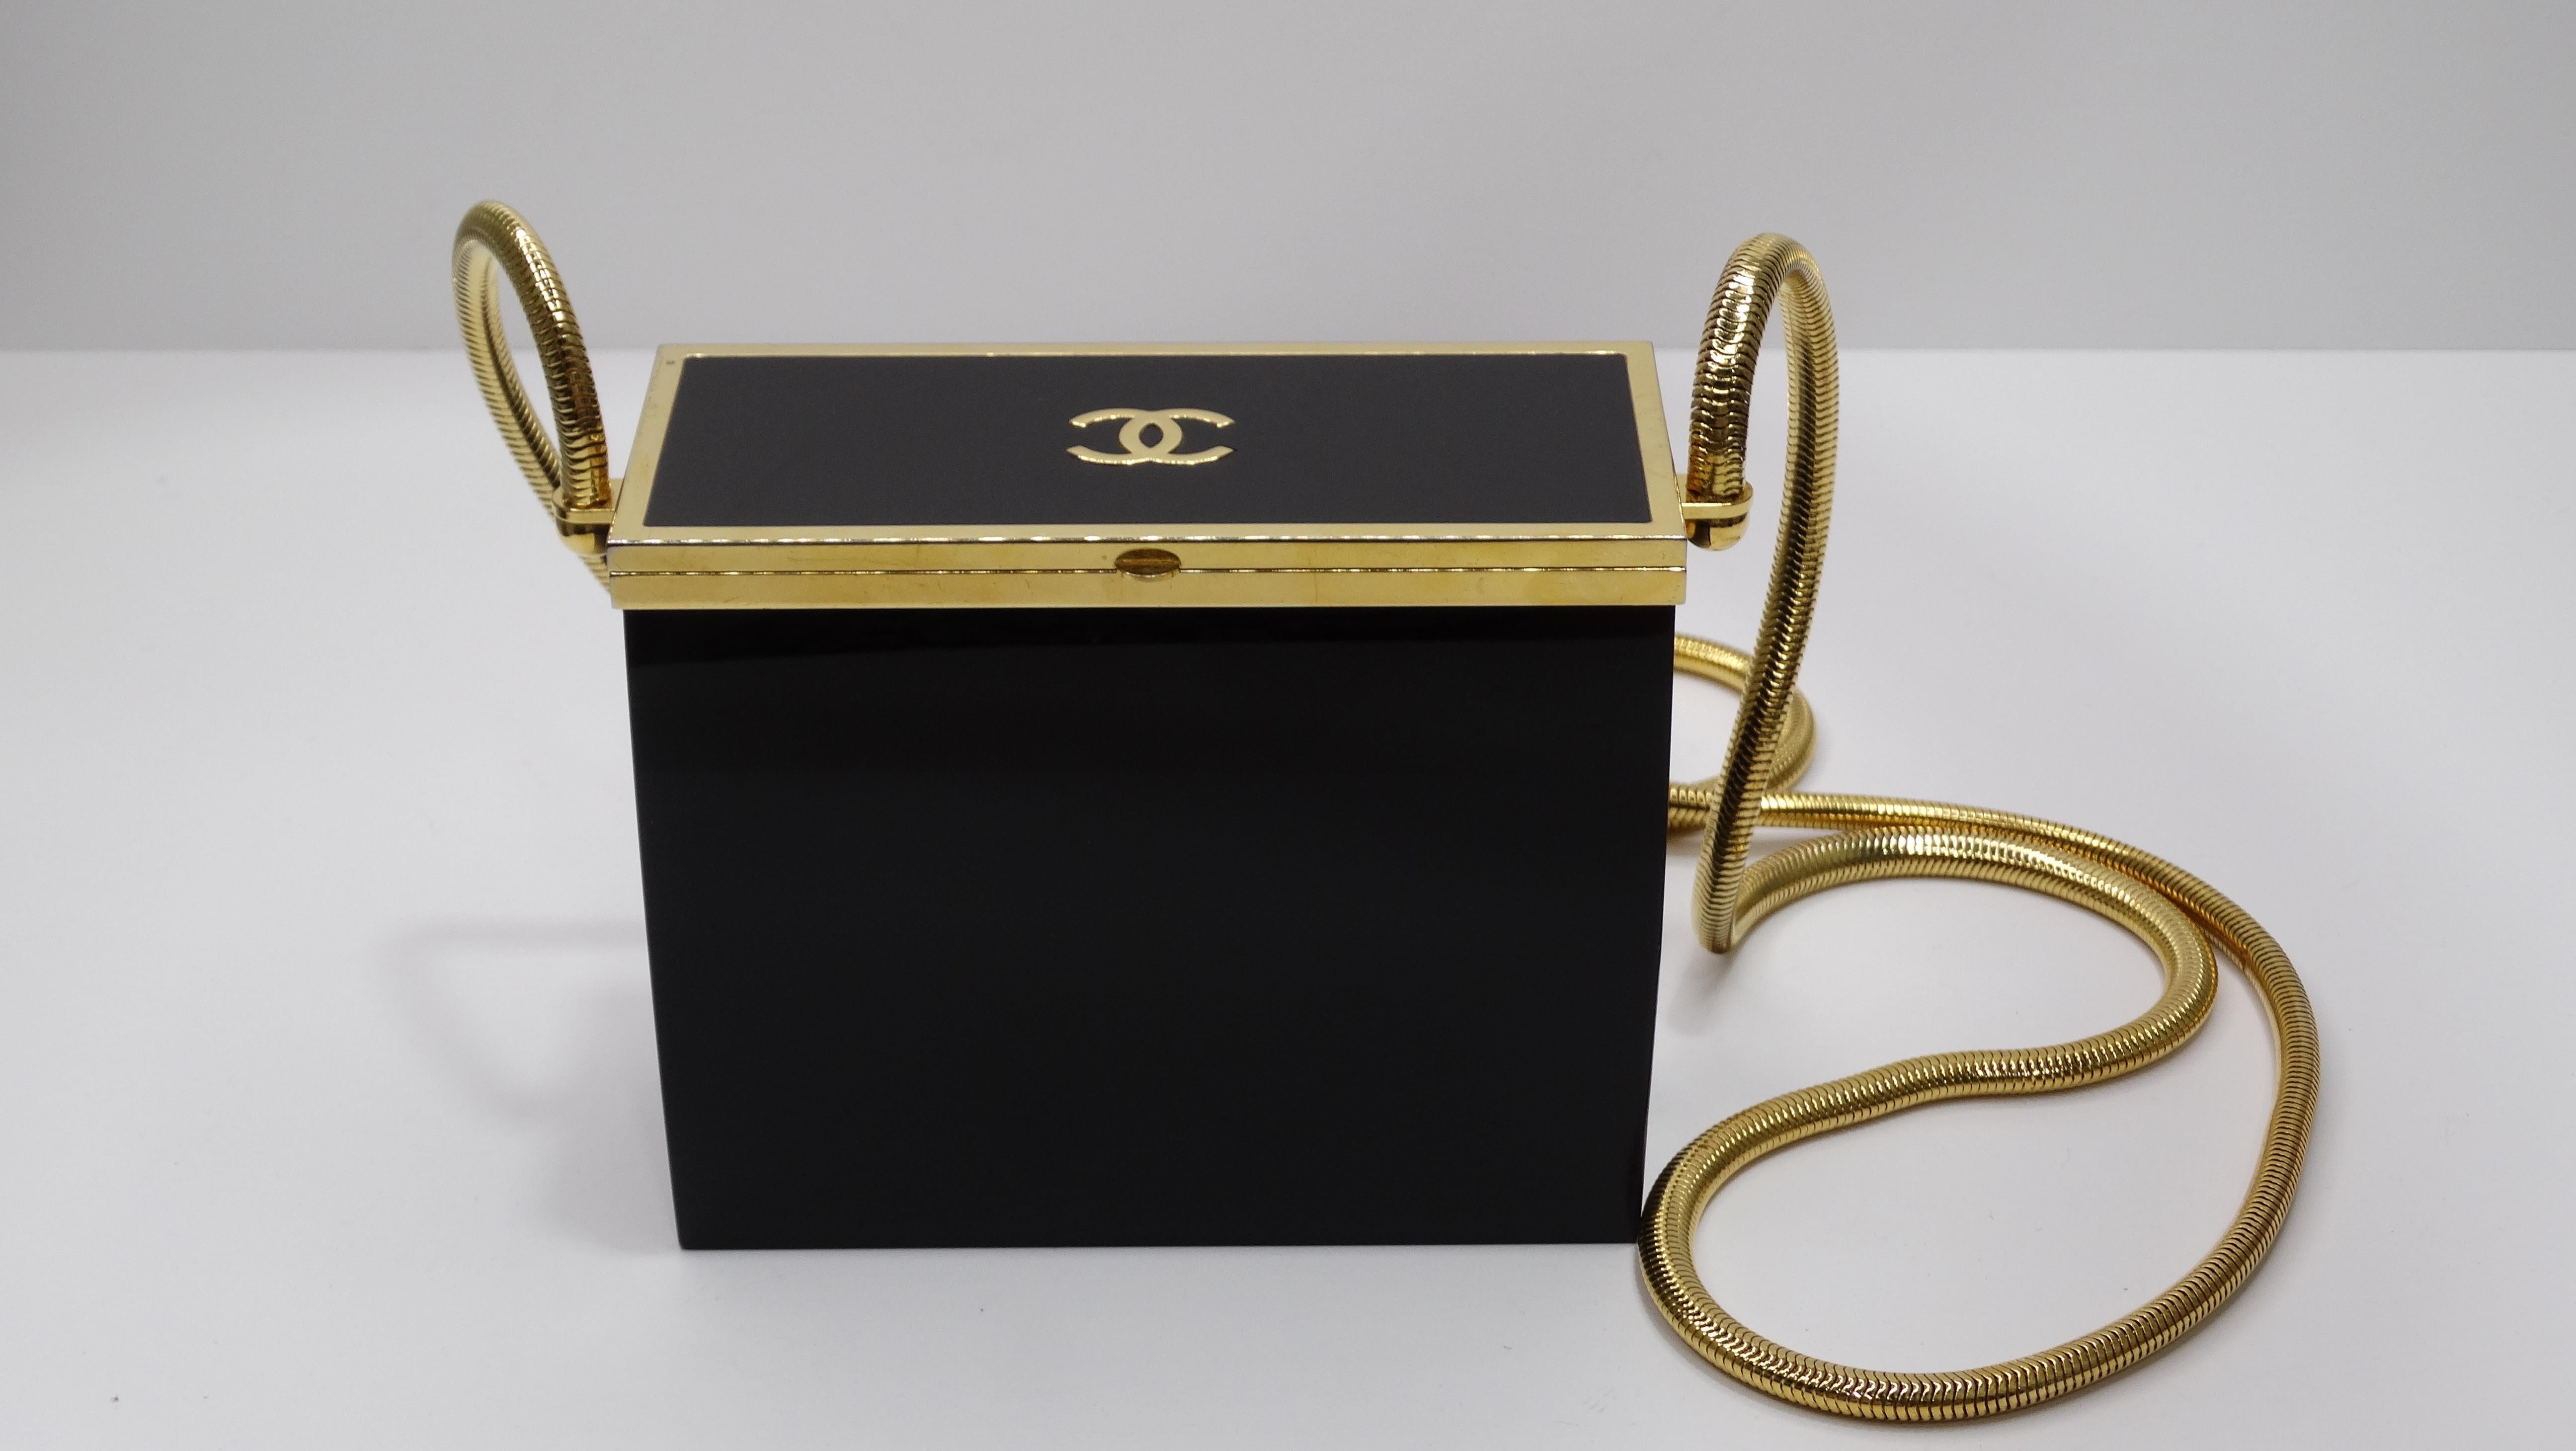 A beautiful vintage Chanel Spring 1997 find! This is a major conversation piece as there won't be a single person who won't notice this gem. Black acrylic body with a push-lock closure boldly contrasts with gold framing, gold 